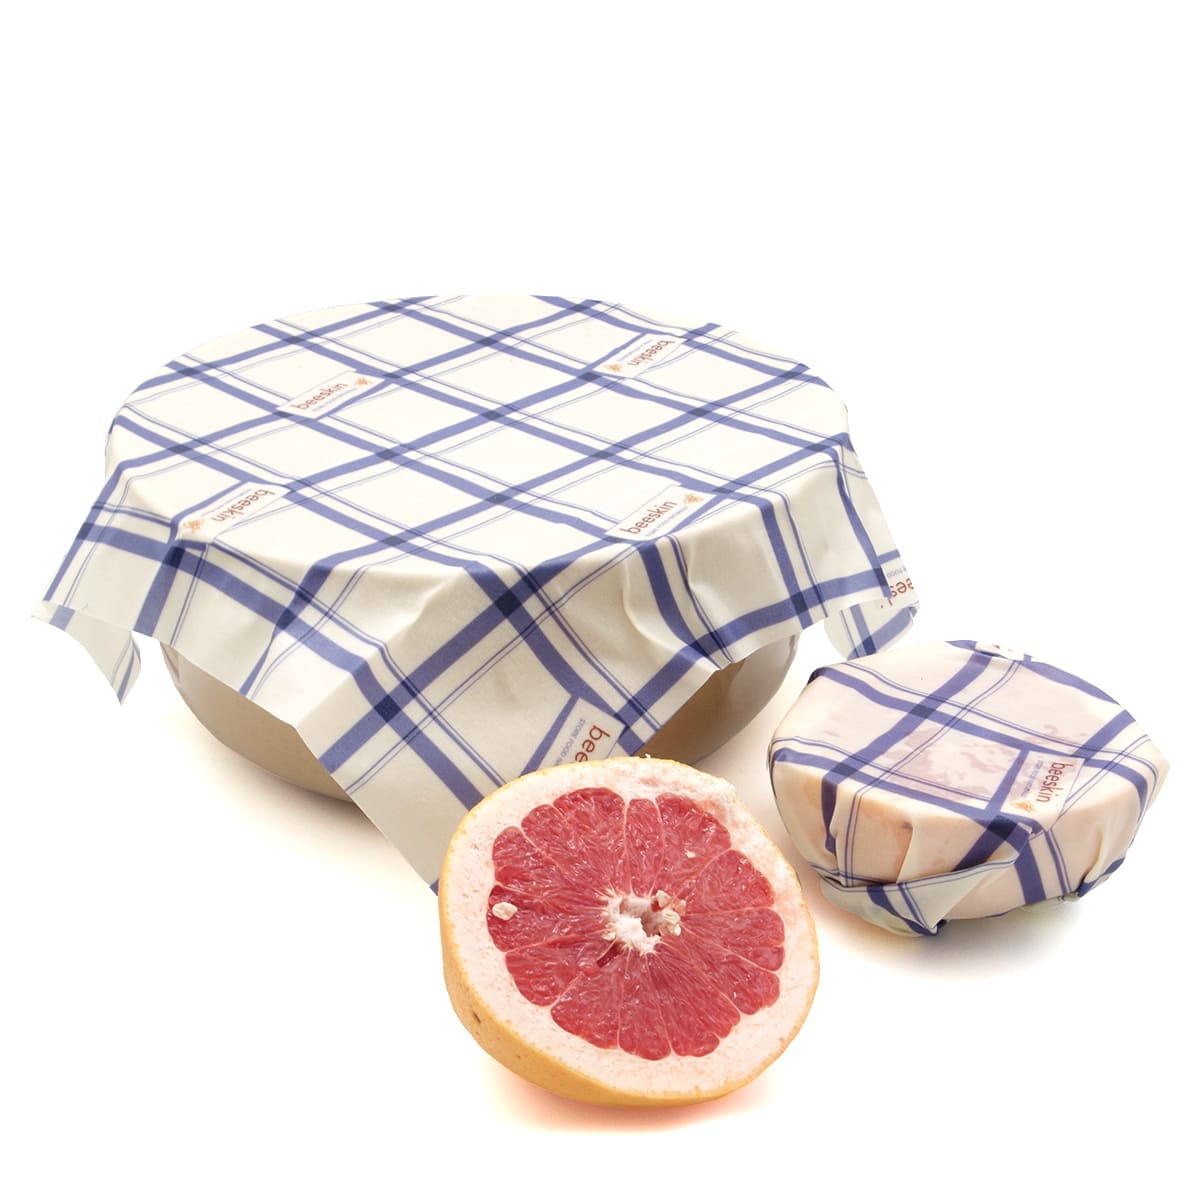 beeskin beeswax wrap ml kitchen covering a bowl and a grapefruit that is cut in 2 half